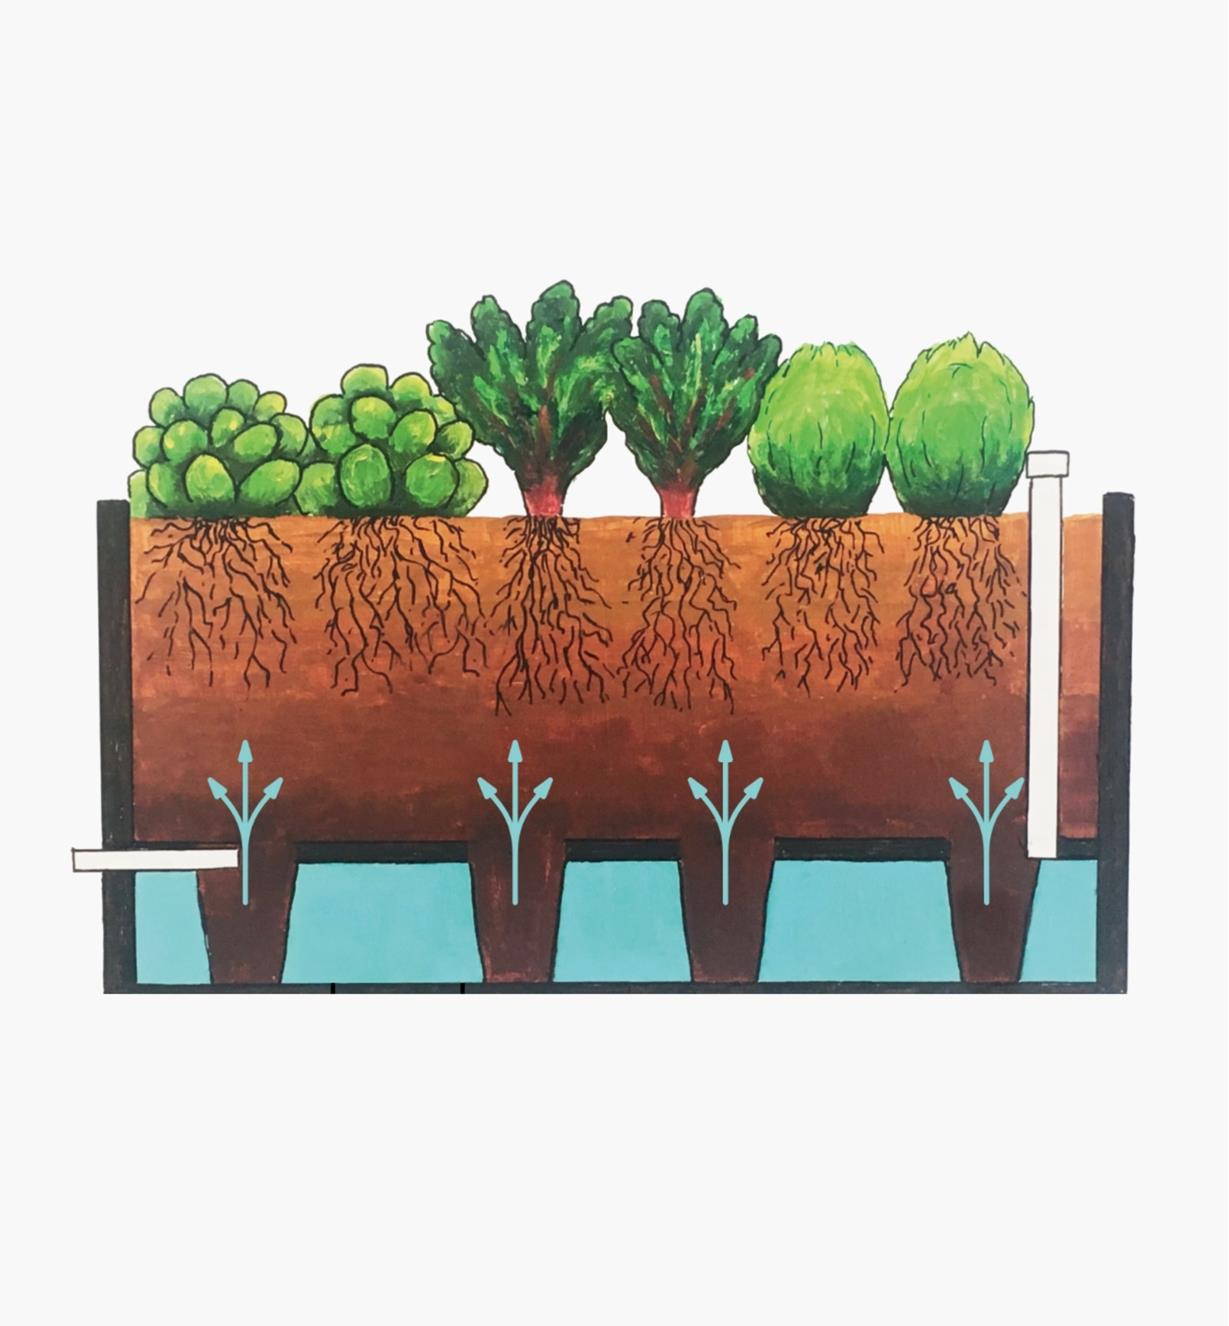 Cutaway view illustrating soil wicking water from the reservoir of the self-watering raised bed kit